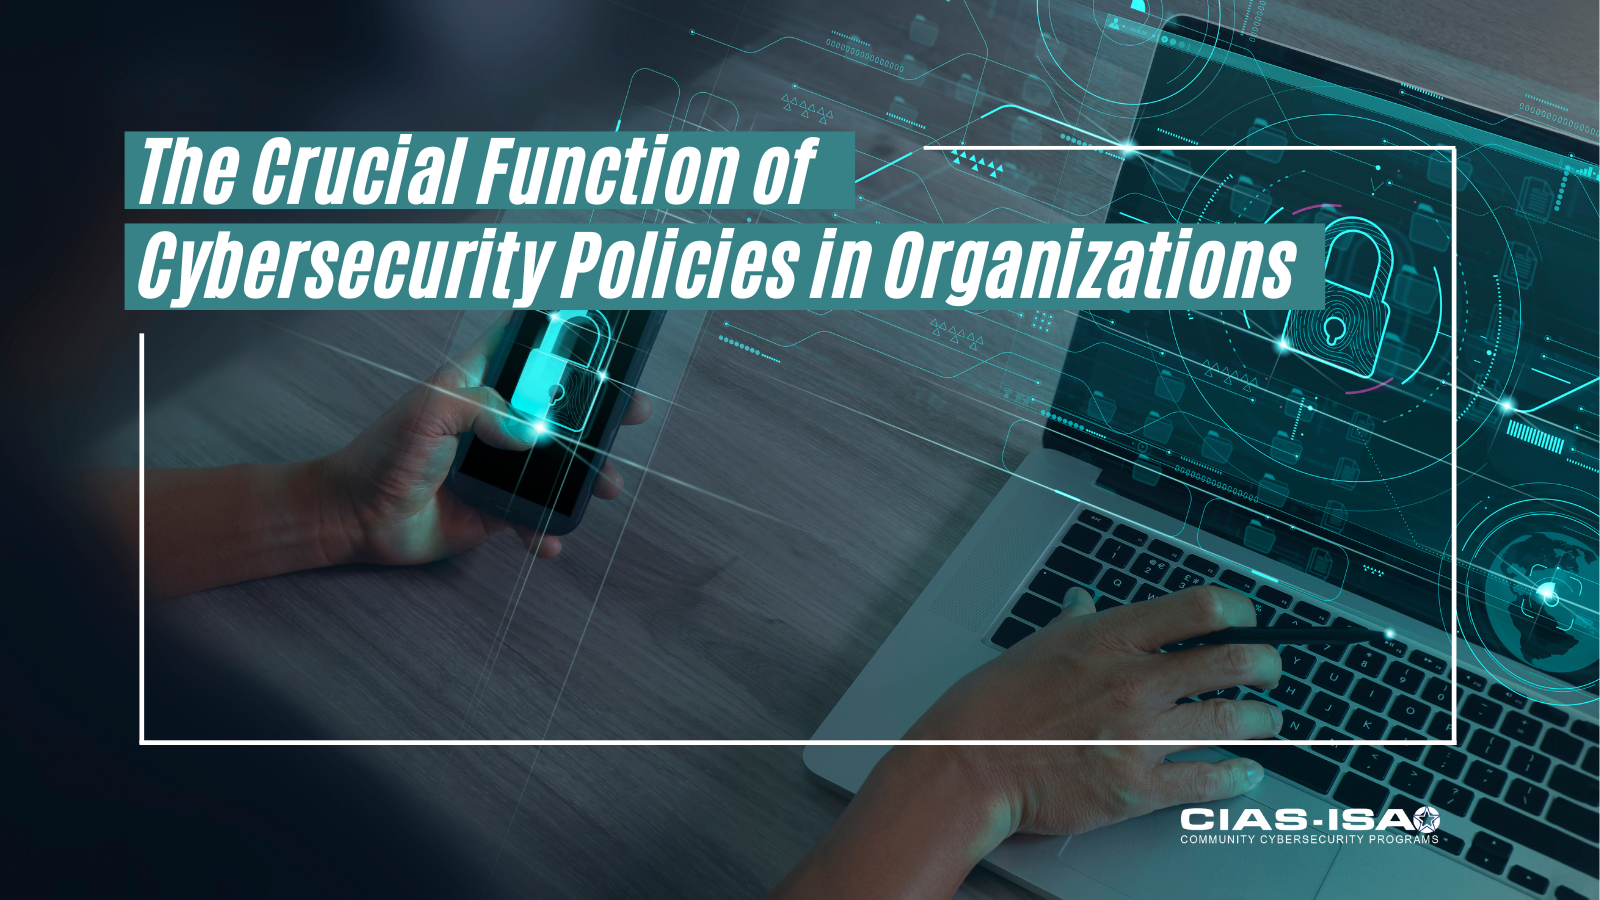 The Crucial Function of Cybersecurity Policies in Organizations